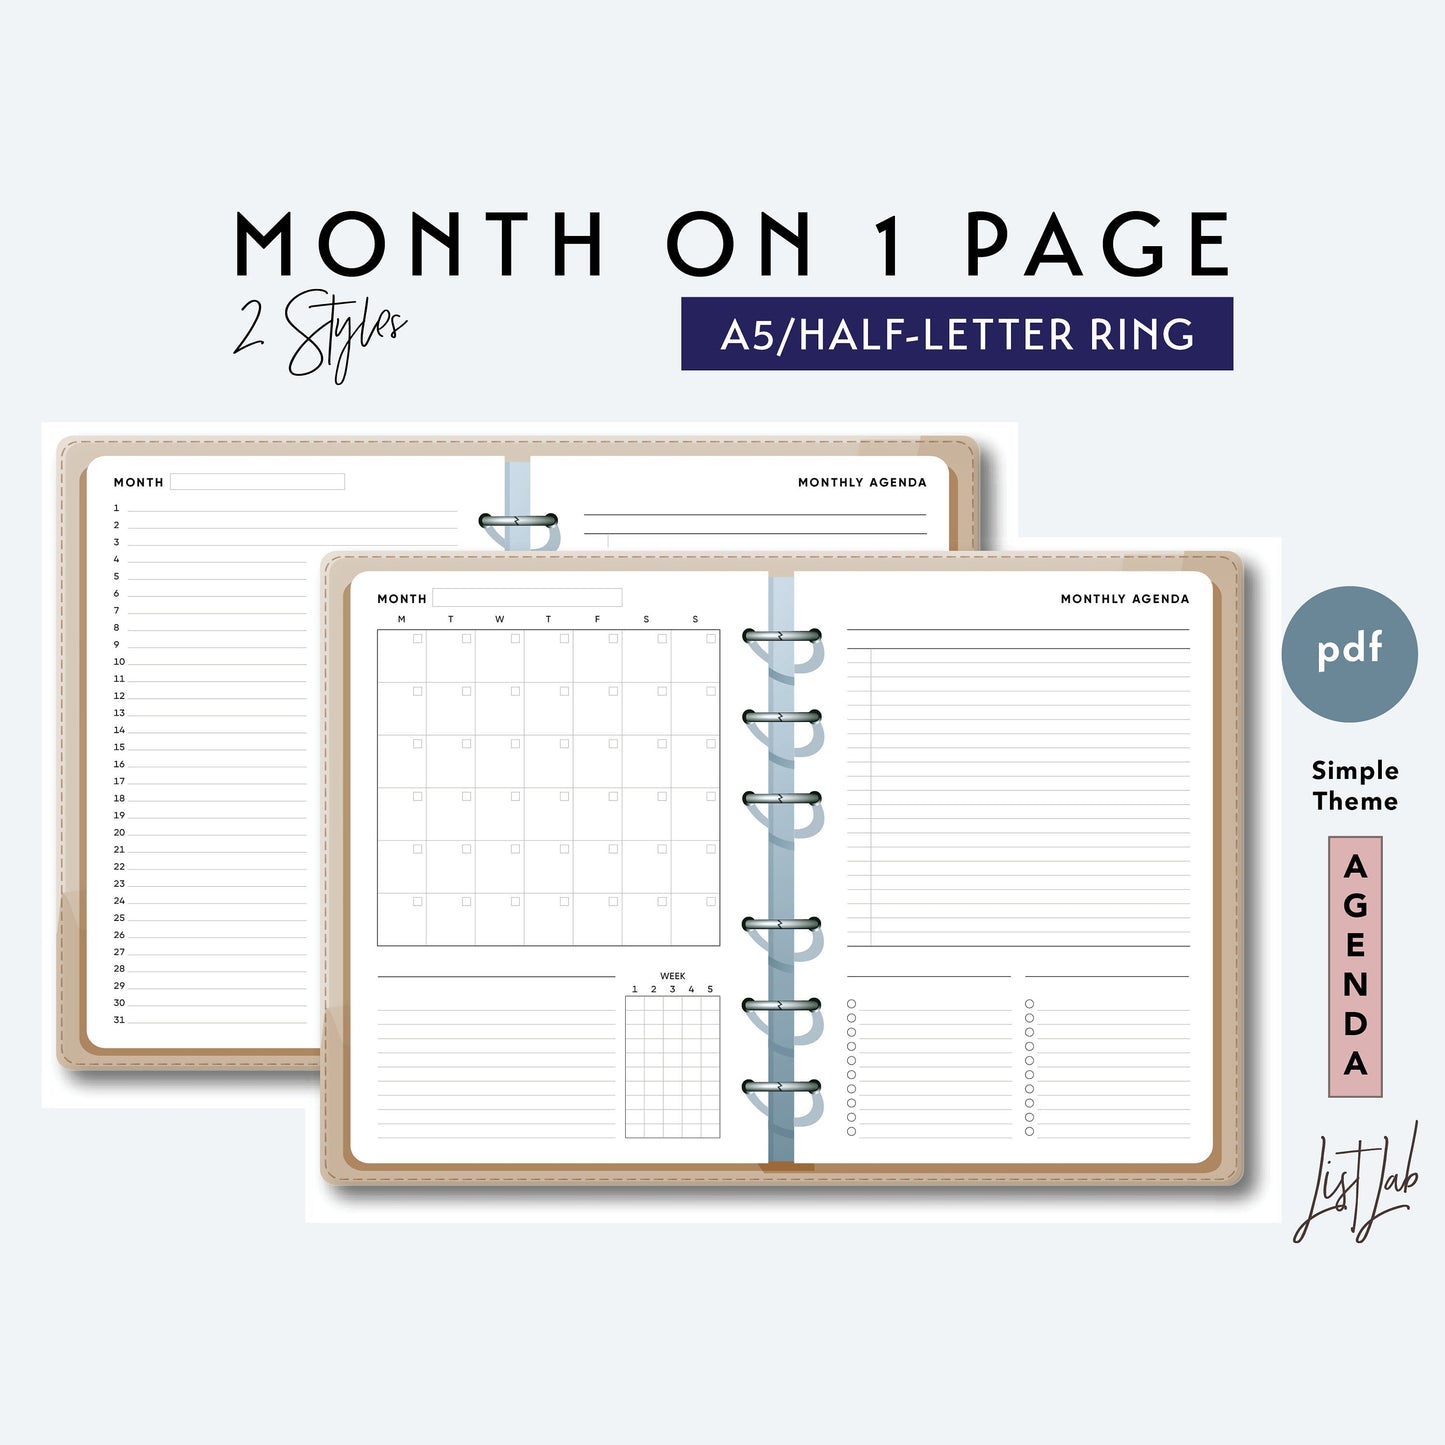 A5 / Half-Letter Ring MONTH ON 1 PAGE with Lists and Tracker Printable Set